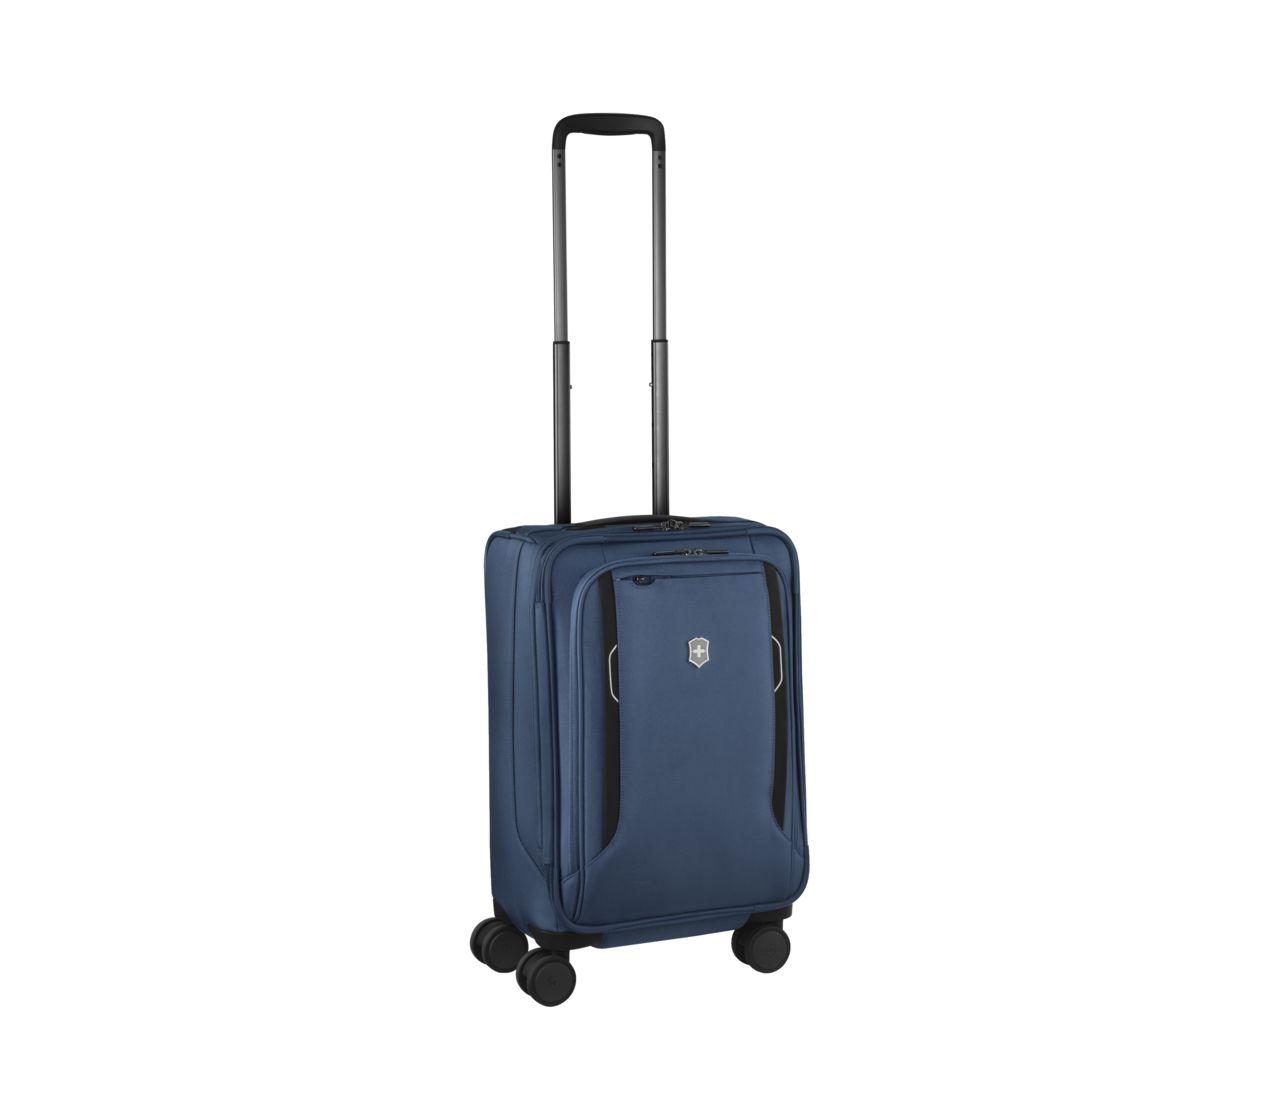 Werks Traveler 6.0 Softside Frequent Flyer Carry-On-607260